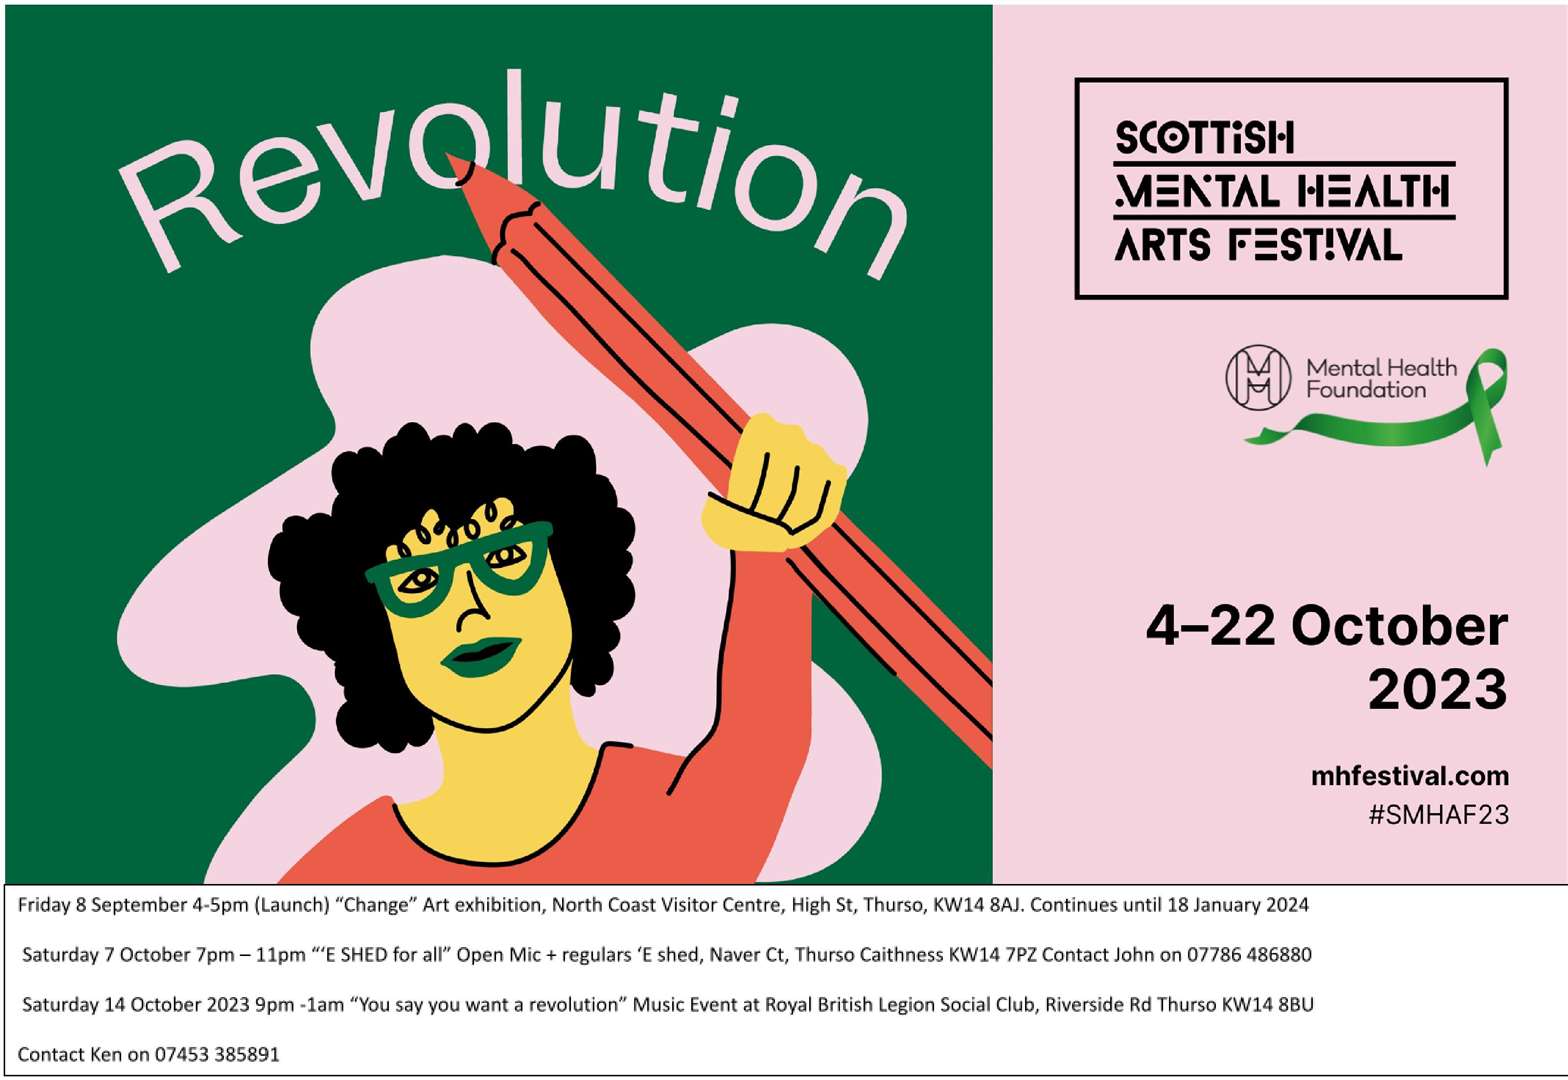 The Scottish Mental Health and Arts Festival theme this year is 'Revolution'.